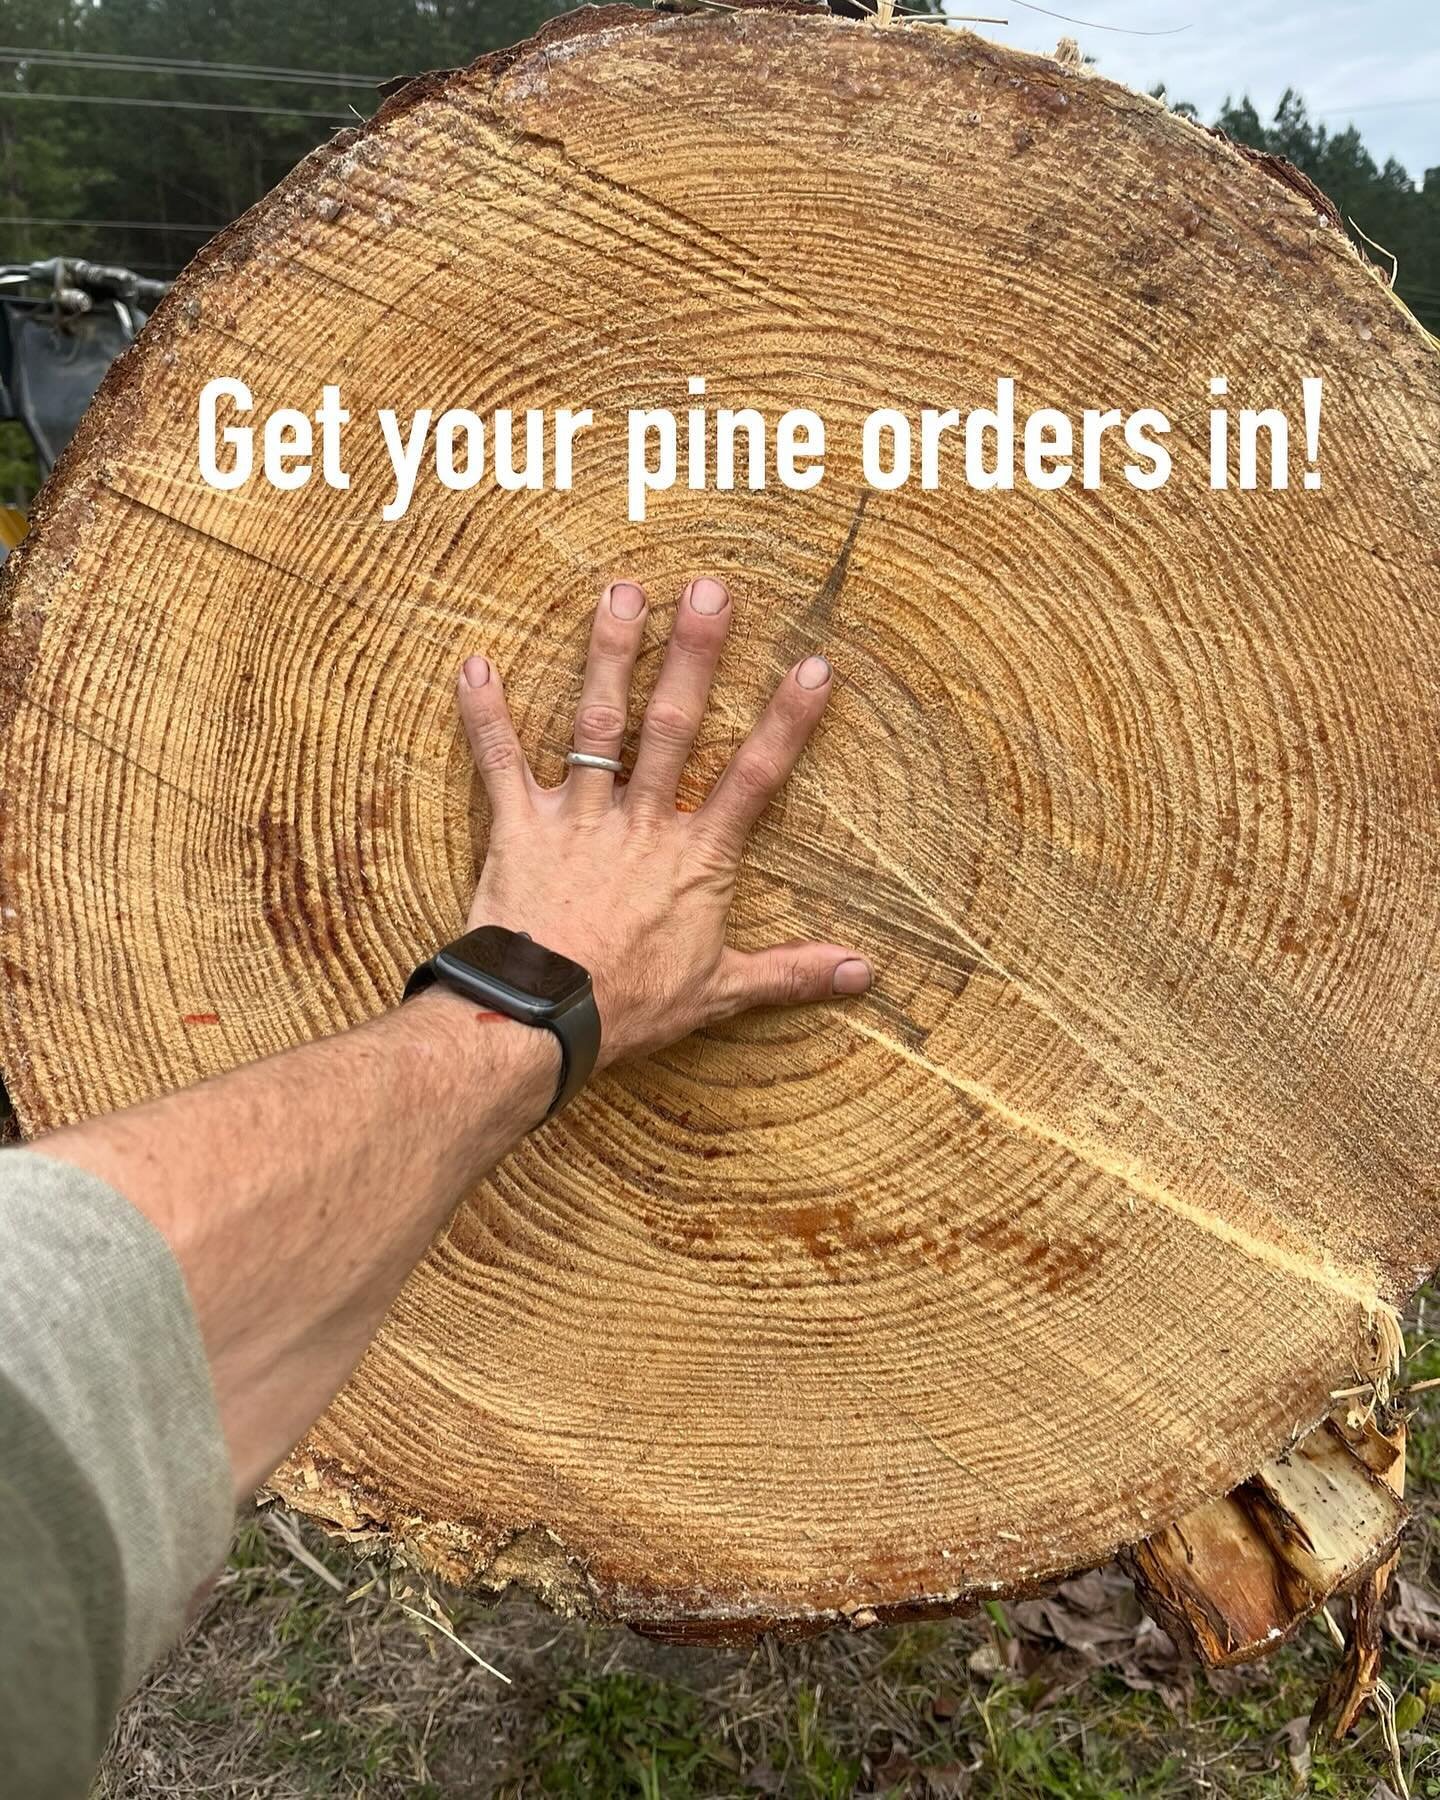 If you&rsquo;ll need pine siding or framing lumber in the next few months, now is a great time to get in touch. We&rsquo;ll be milling pine all next week. And tomorrow we&rsquo;ll be buying some of the most gorgeous fresh cut pine logs that we&rsquo;